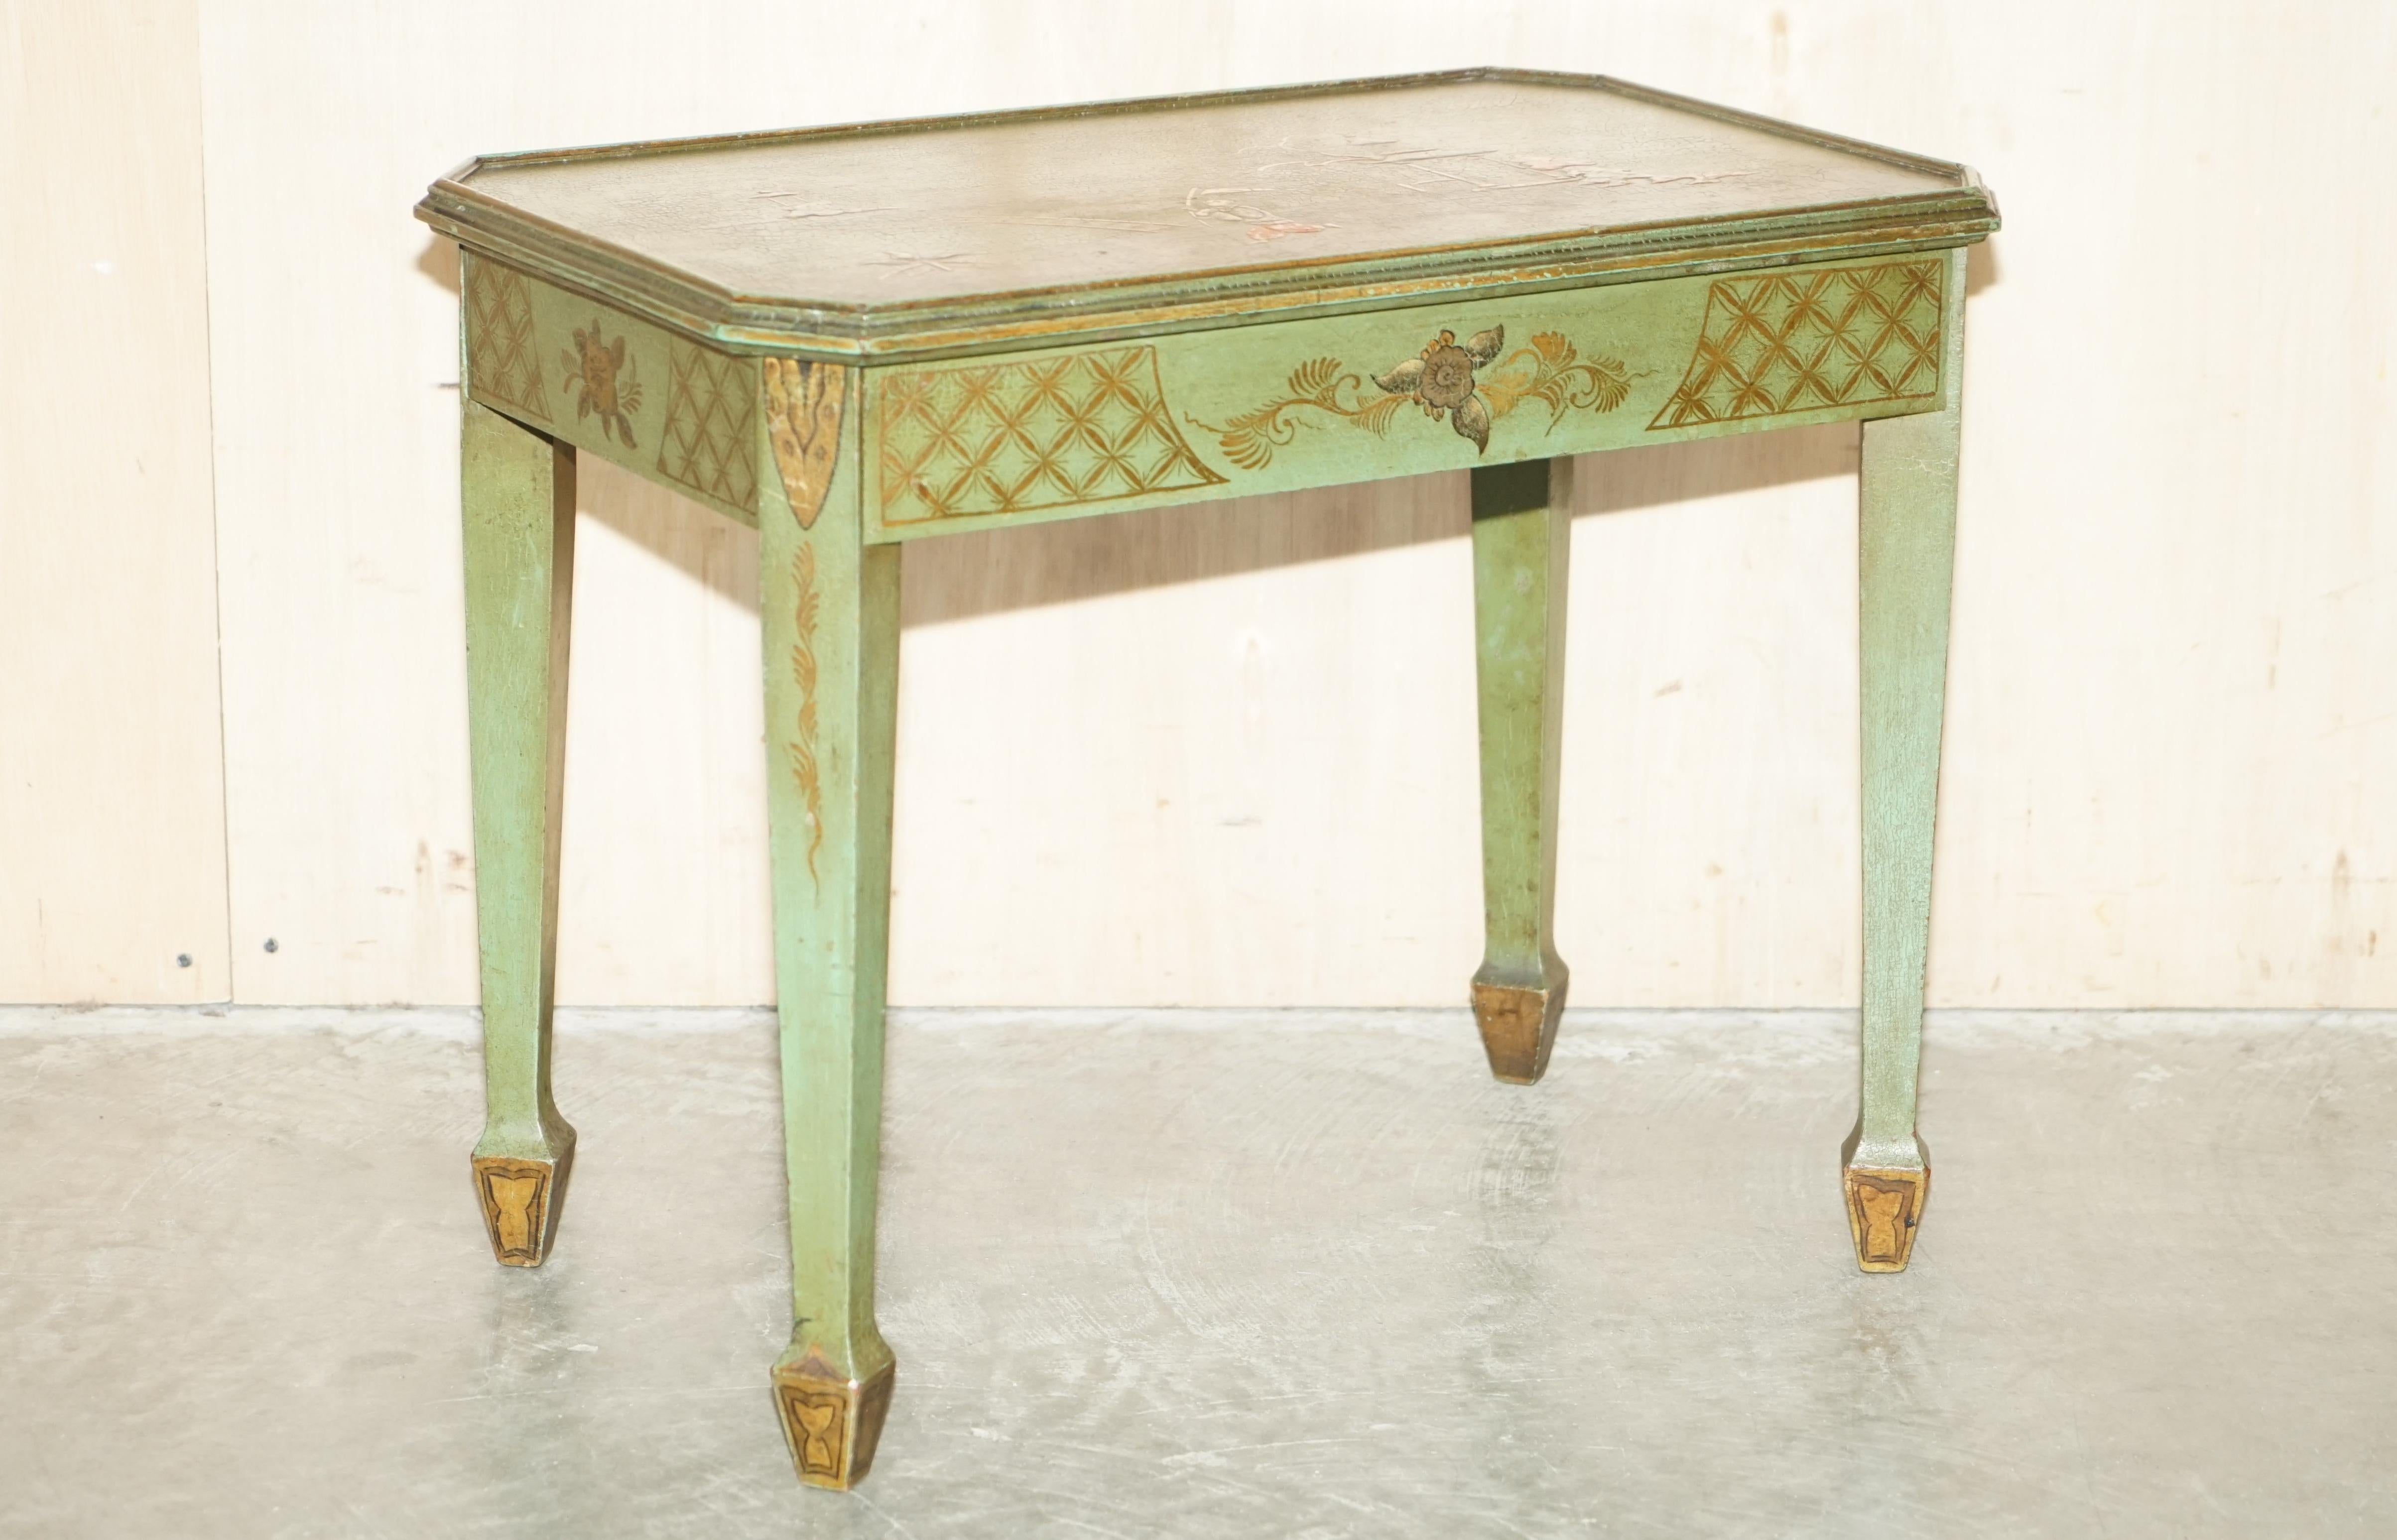 We are delighted to offer for sale this lovely circa 1880-1900 hand made Chinese Chinoiserie side table in oak with stunning original green paint finish

A very good looking and well made piece, the finish is 100% original and untouched, it looks